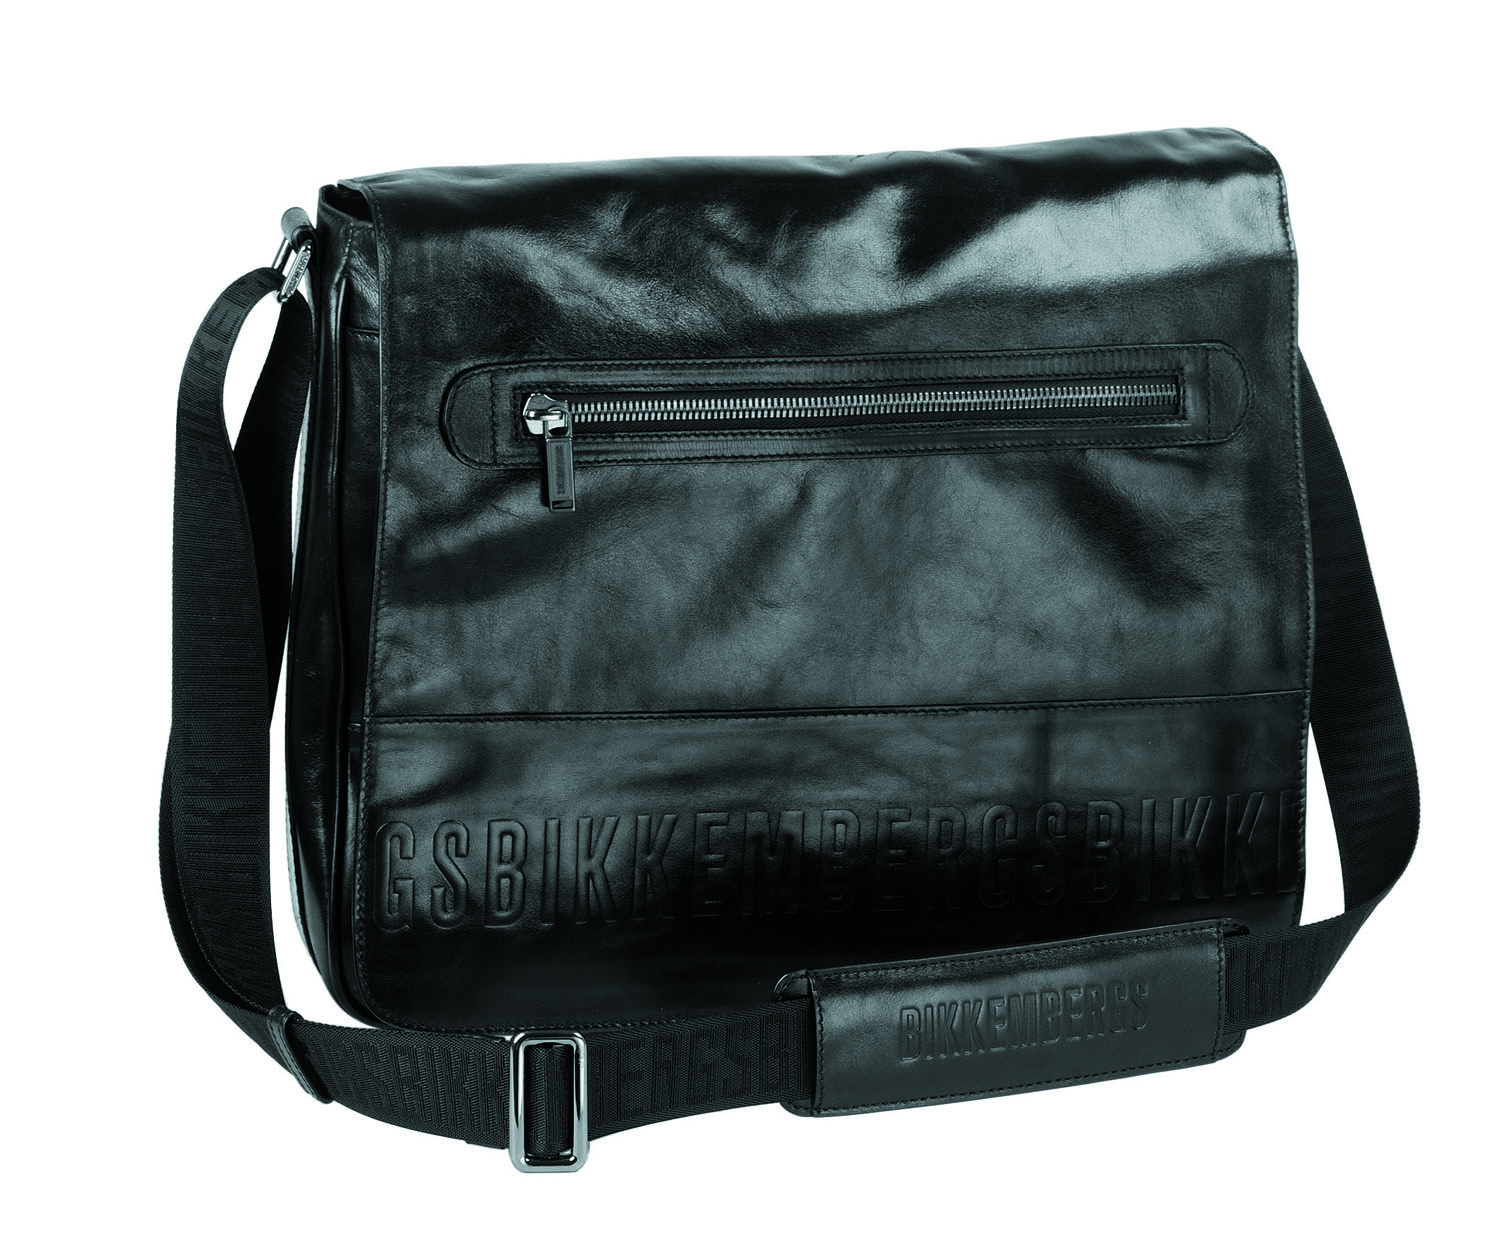 Dirk Bikkembergs Leather Accessories: Perfect for being Up in the Air